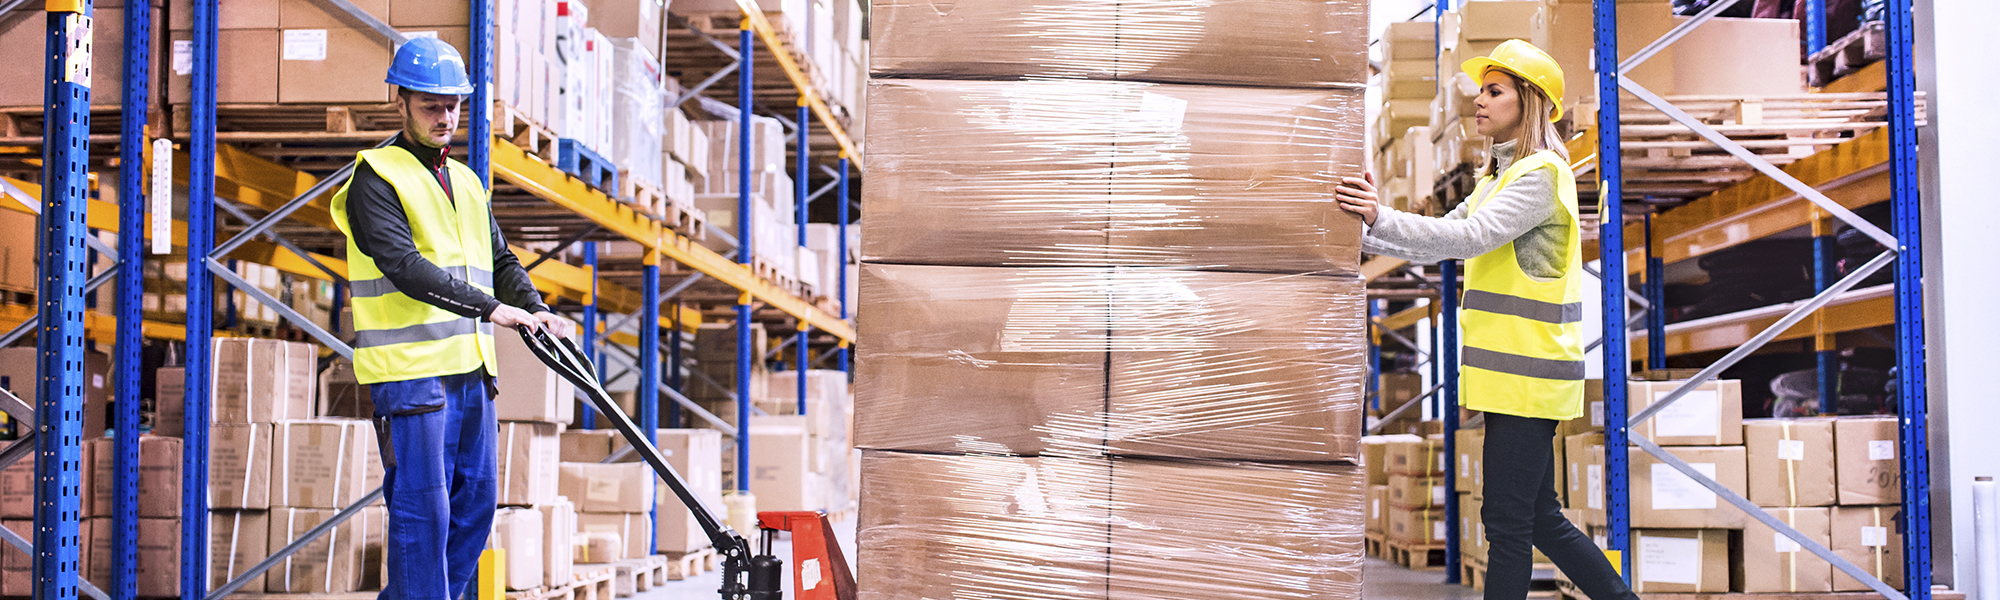 The Cost Benefits of Accurate, Automated Pallet Labeling